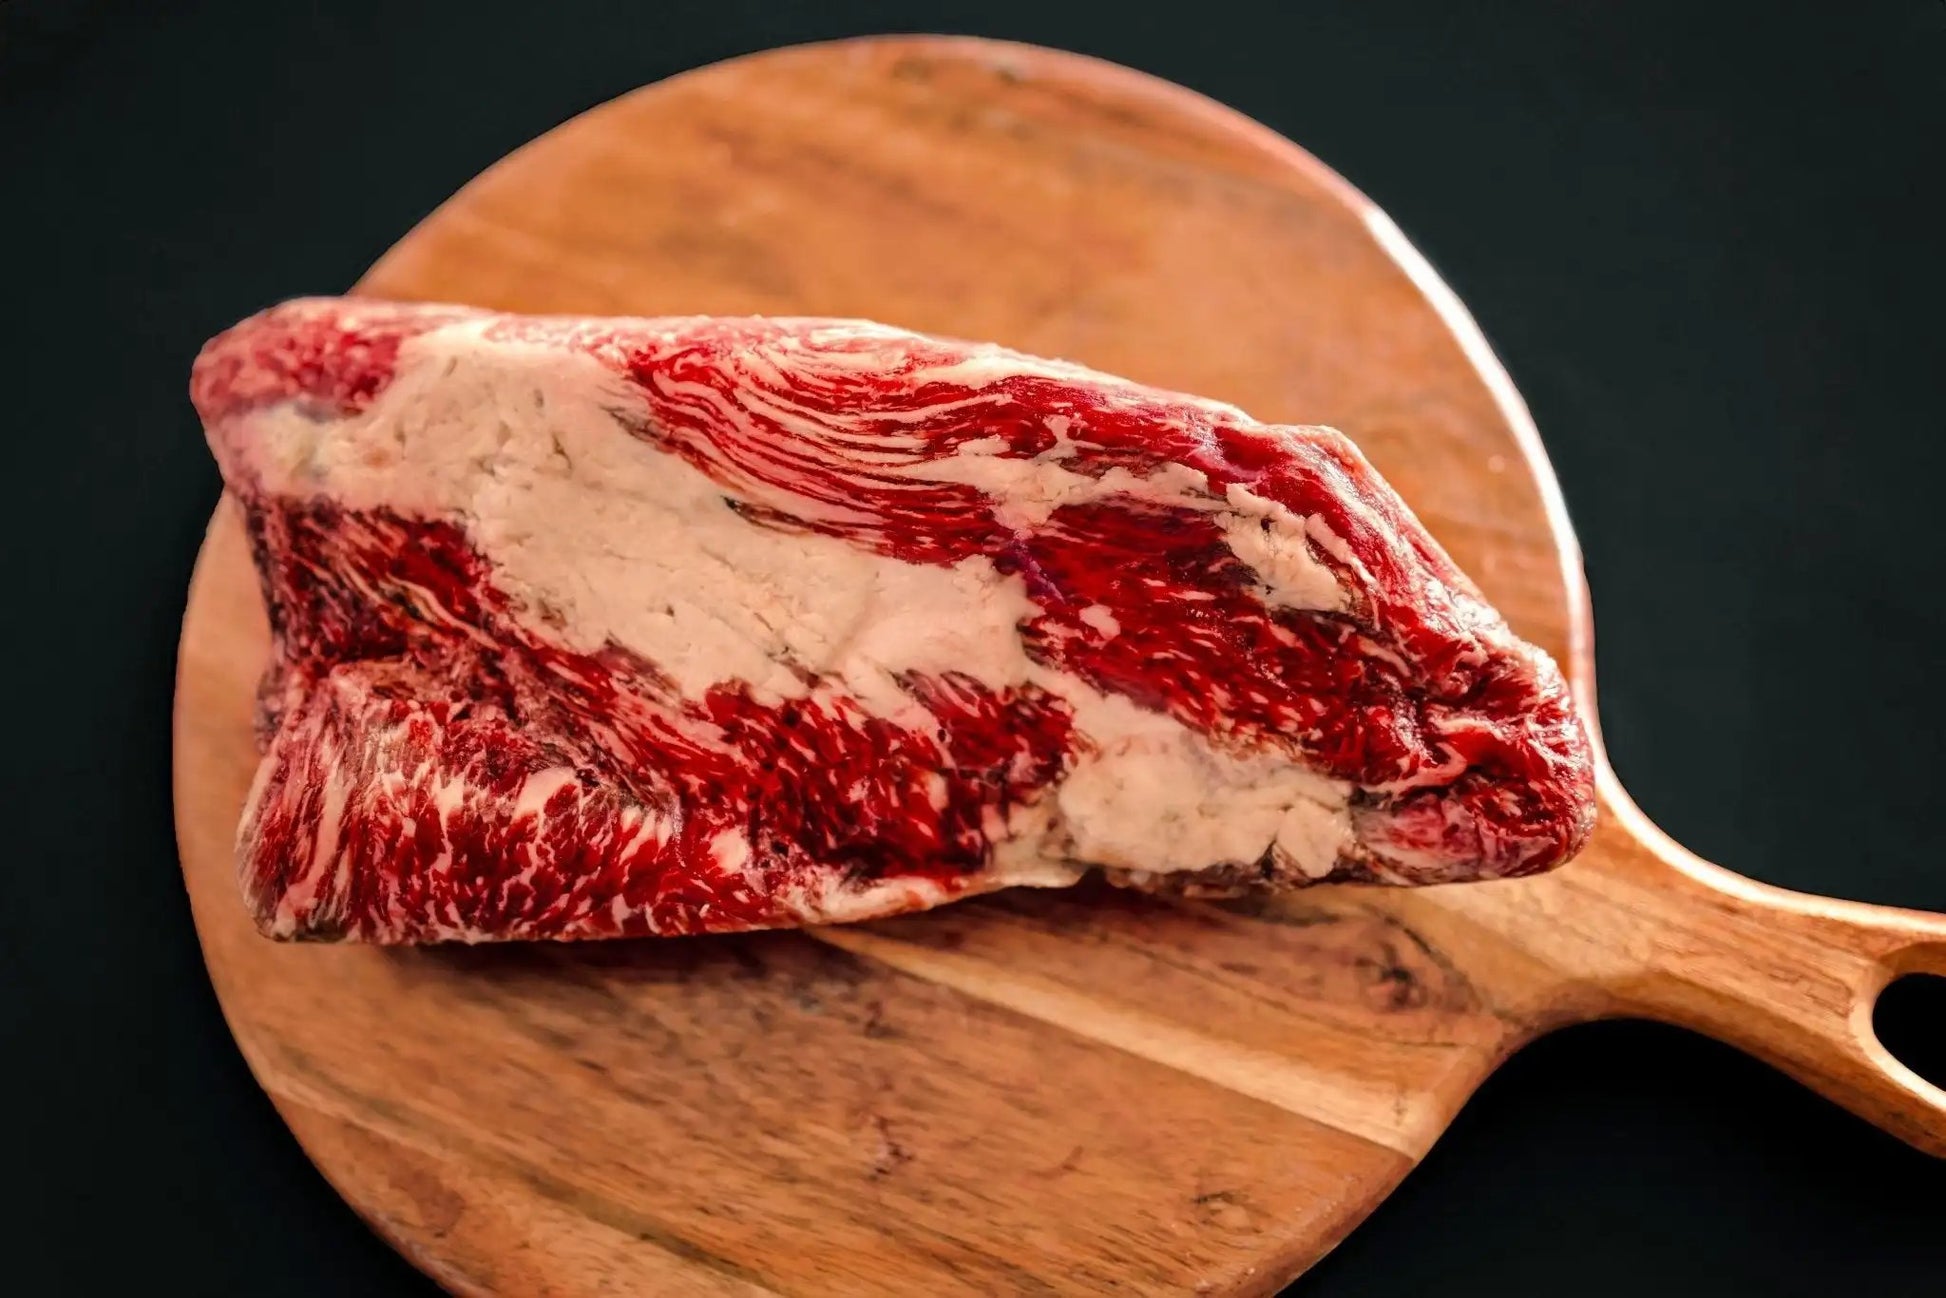 100% All-Natural Grass-Fed Pasture-Raised Wagyu Tri-TipHufeisen Ranch's 100% All-Natural Grass-Fed Pasture-Raised Wagyu Tri-Tip is the ultimate indulgence for any beef enthusiast. Sourced from below the sirloin, this thi100%The Hufeisen-Ranch (WYO Wagyu)